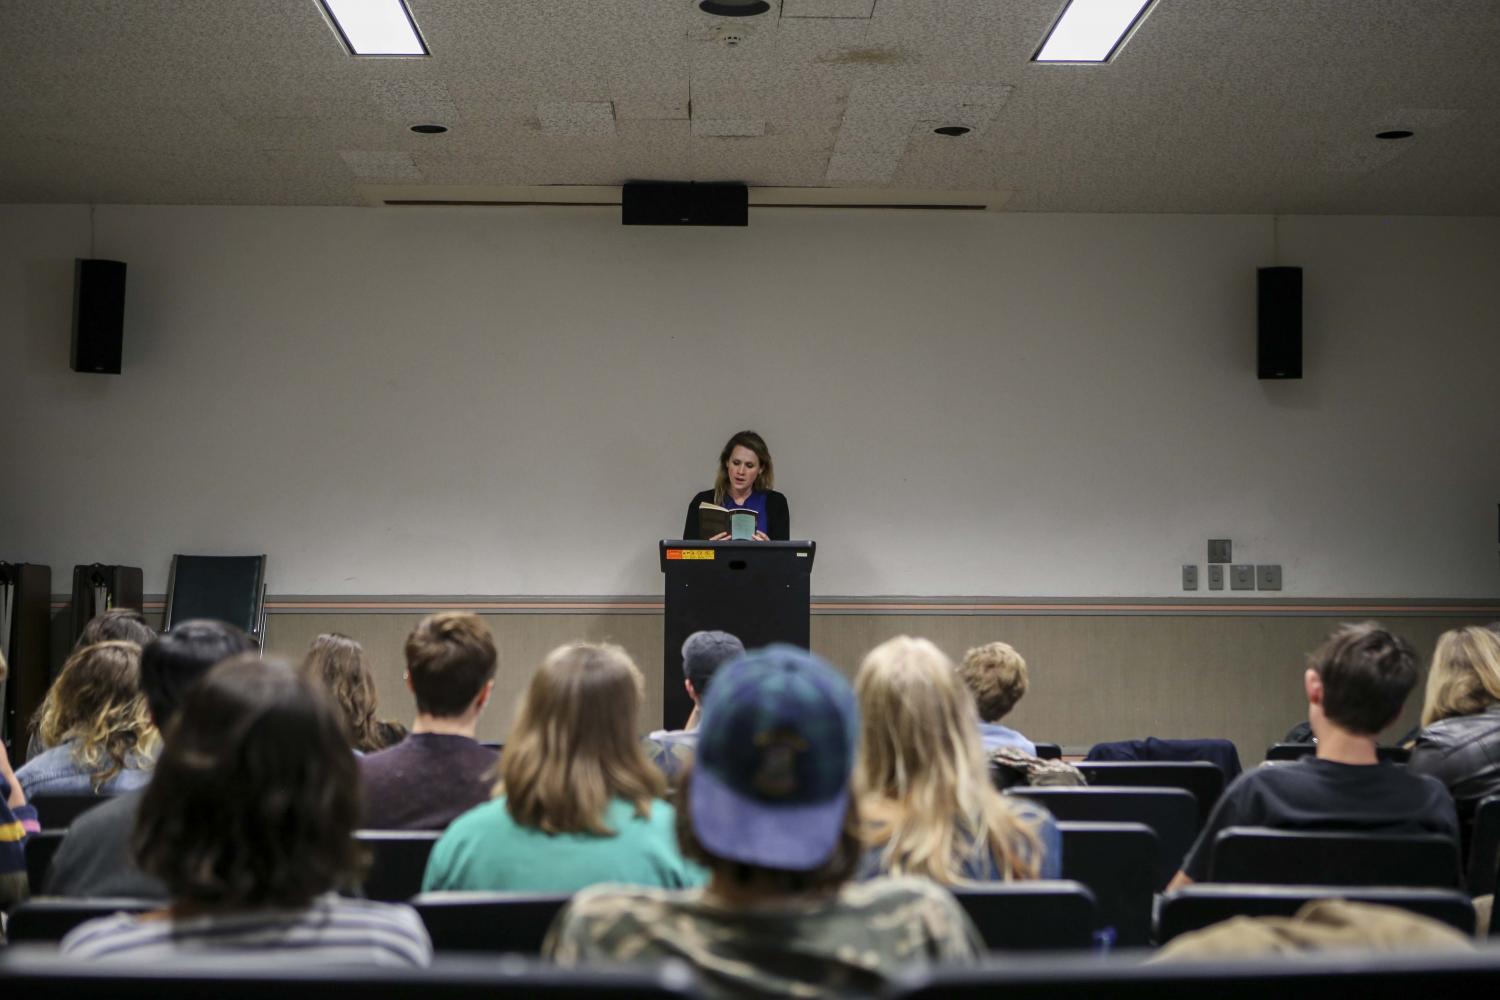 Poet, editor, and assistant professor of English at Cleveland State University Caryl Pagel reads to an audience in Wilder Hall. Pagel came to Oberlin Wednesday to give a poetry reading in which she debuted several new works.